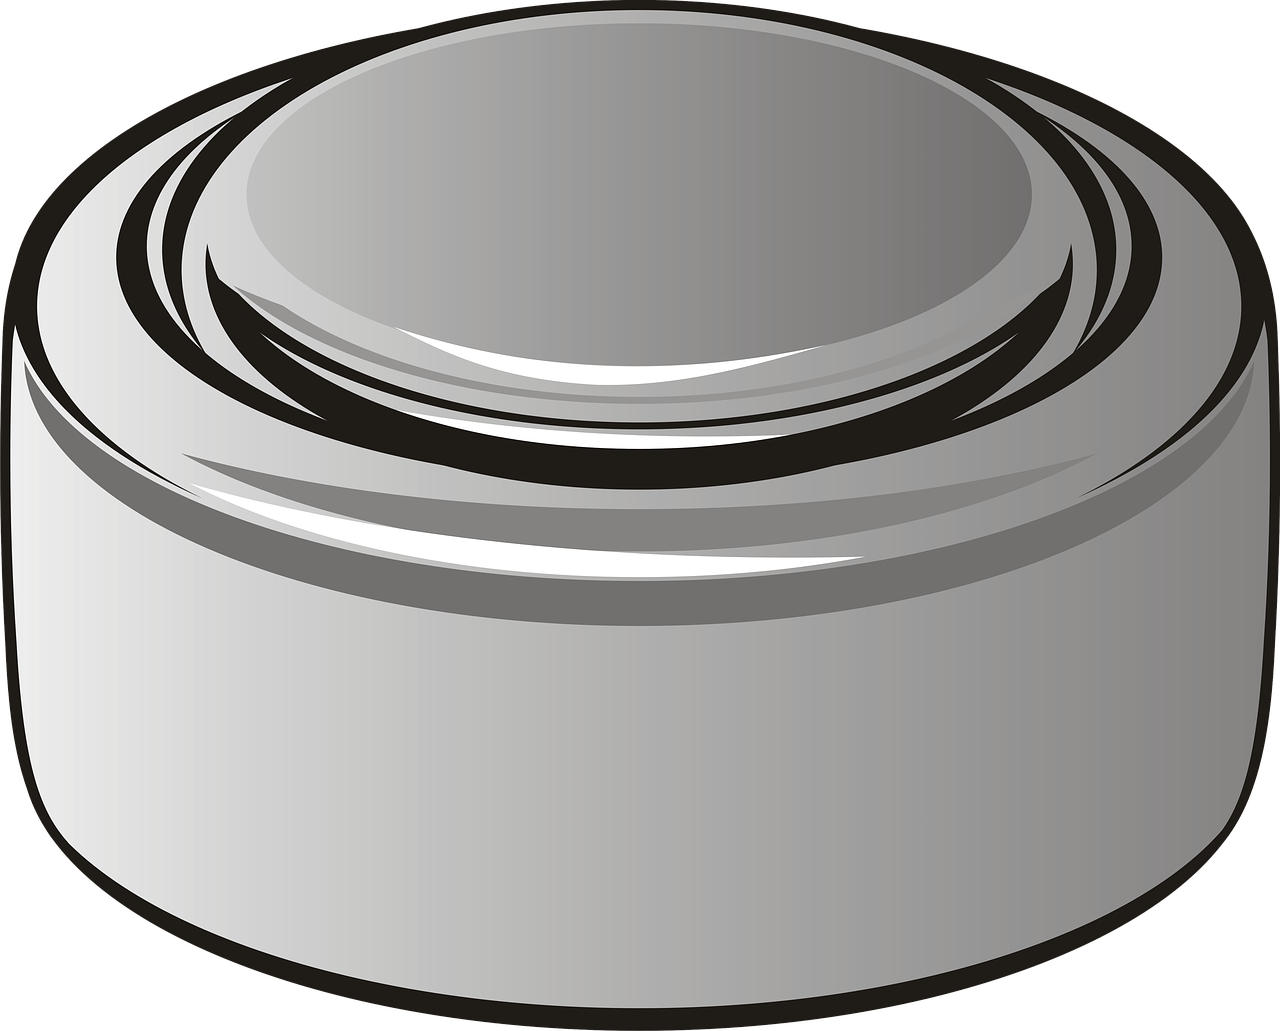 a white container sitting on top of a table, inspired by Veikko Törmänen, pixabay, digital art, metallic buttons, black and white vector, ring, gray color